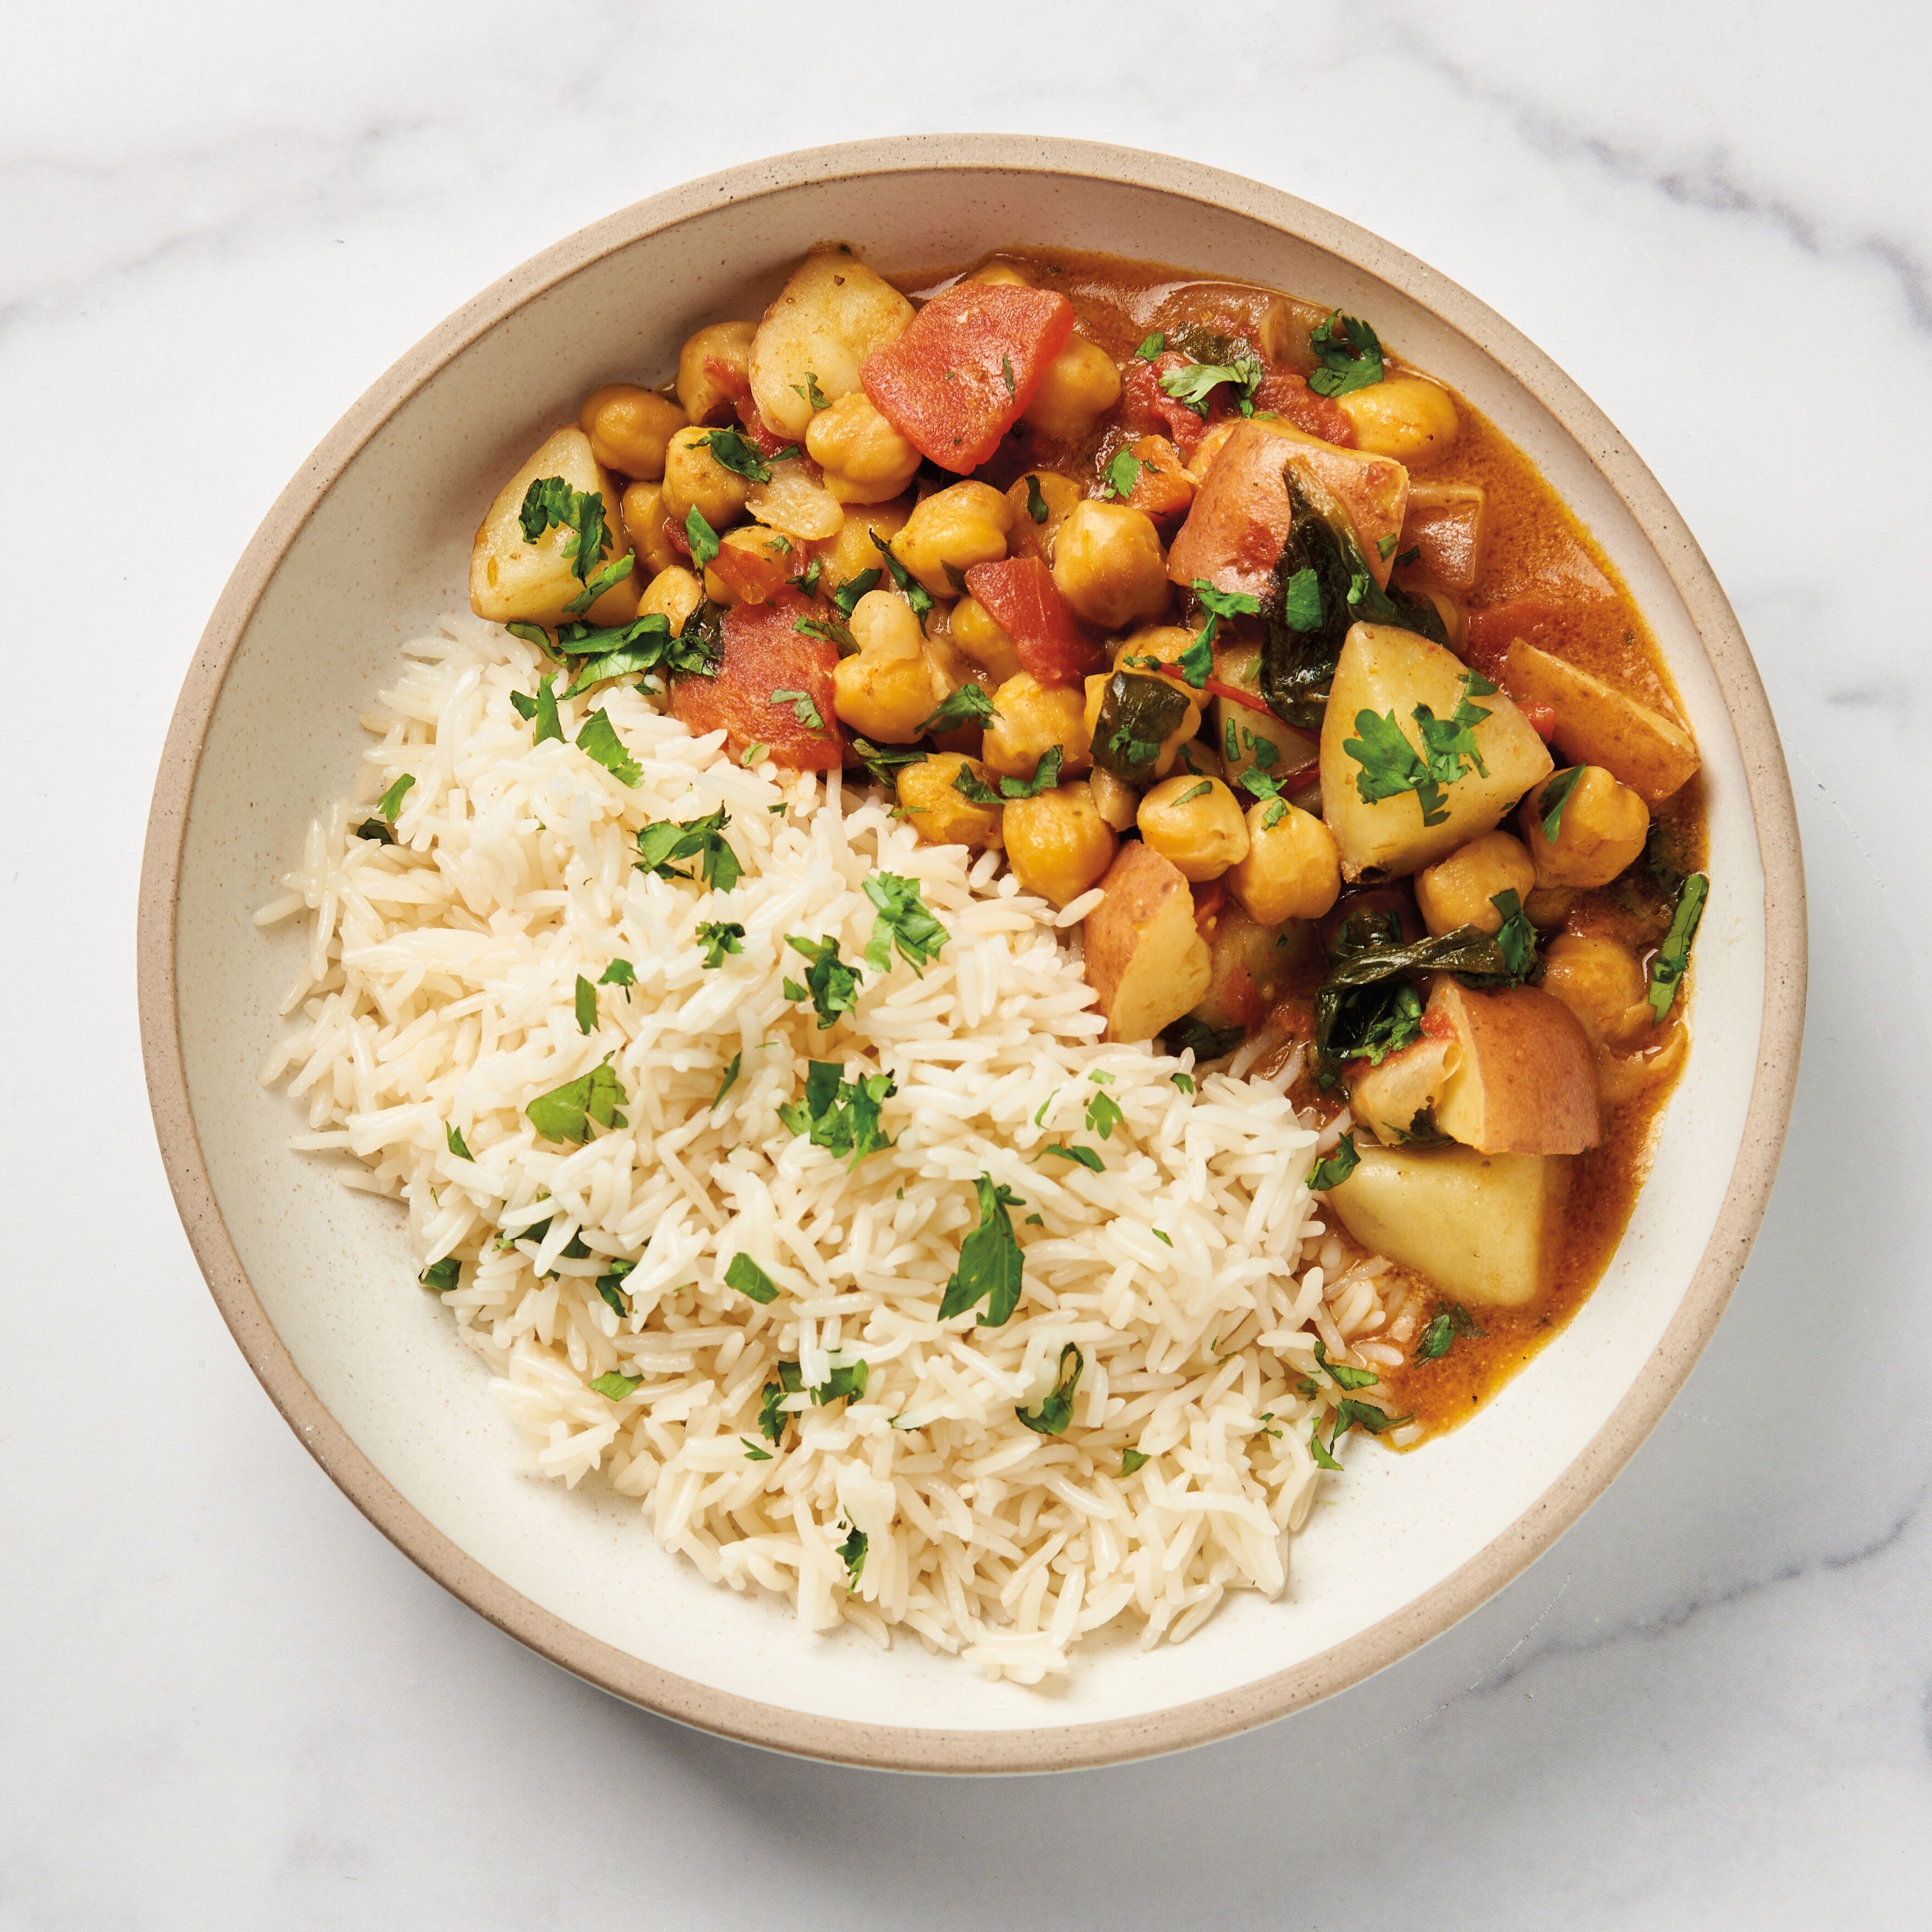 Curry made from chickpeas, potatoes, and tomatoes in a white bowl with basmati rice and cilantro garnish